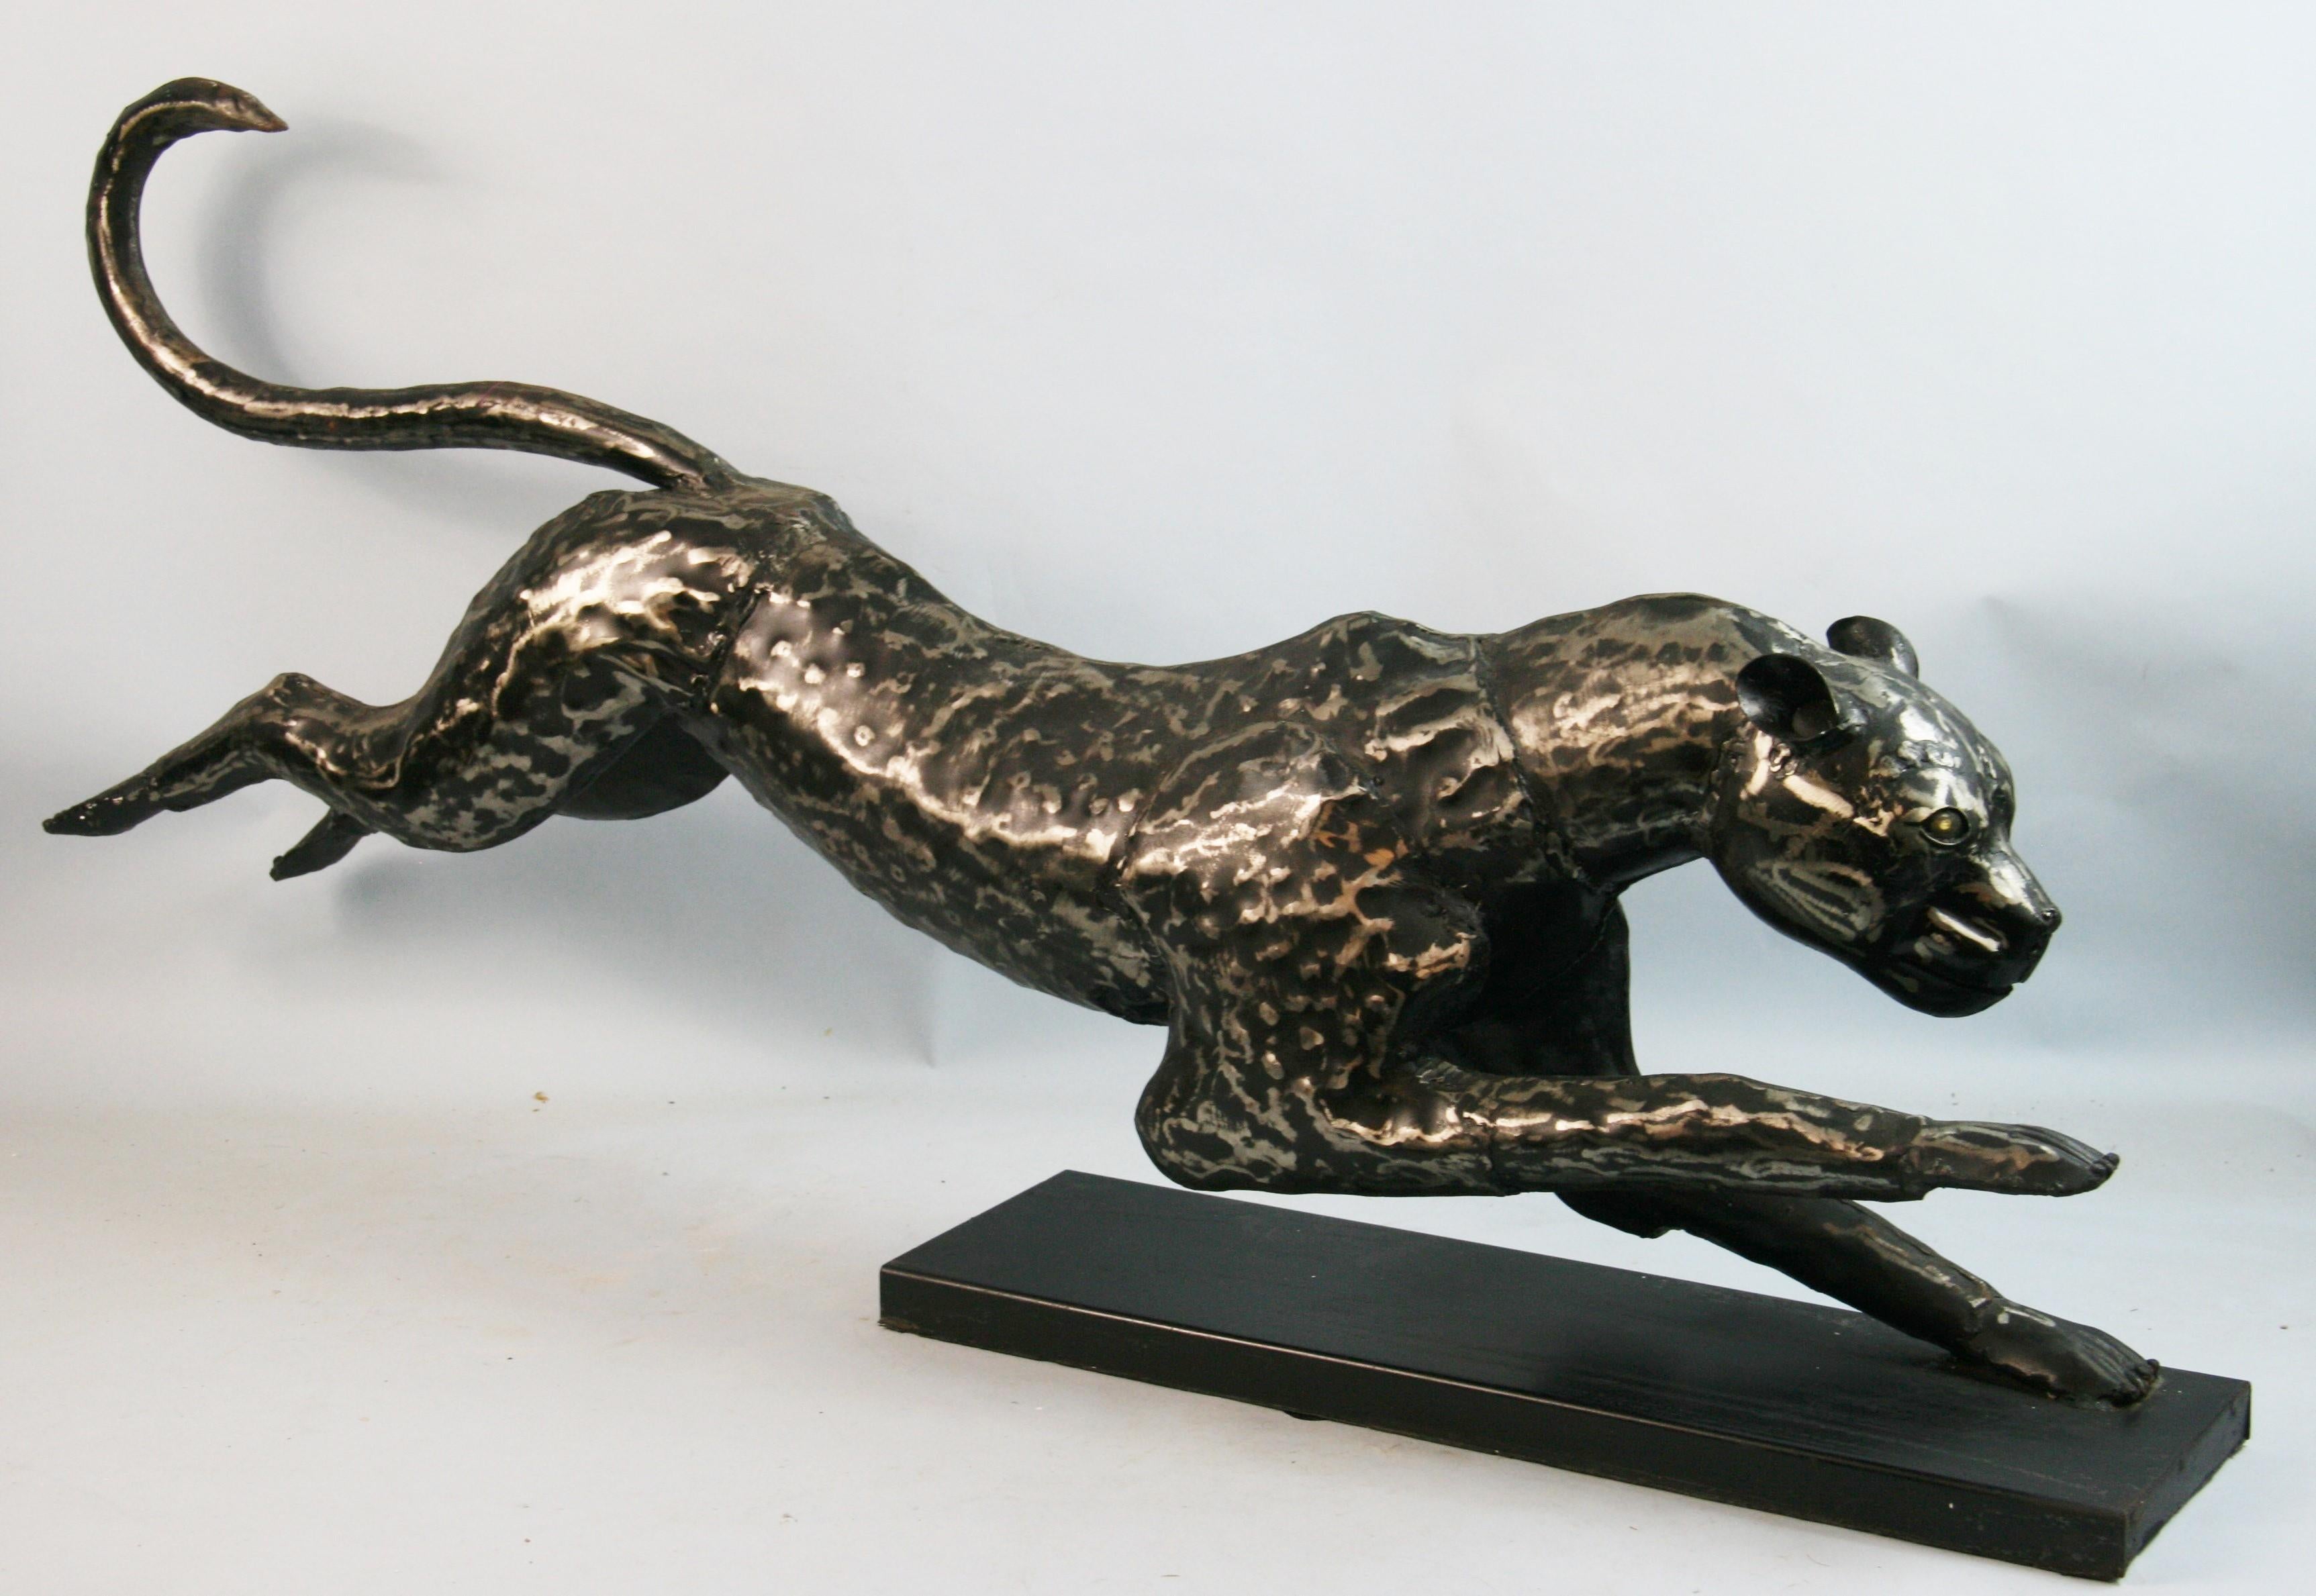 1542 Oversized hand crafted Panter metal  animal sculpture
Body height at tail 21